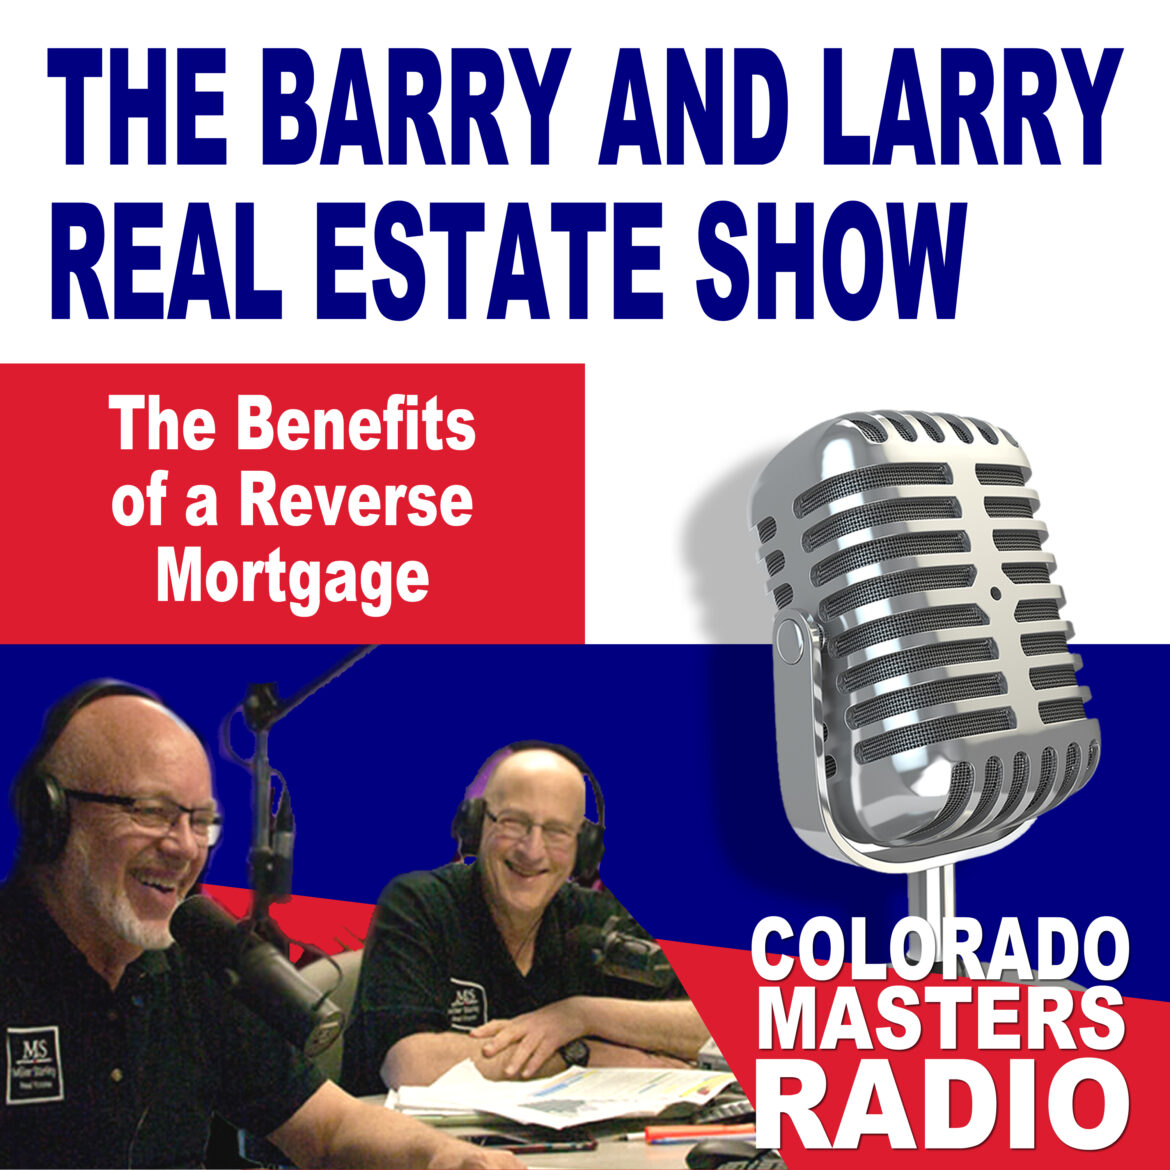 The Larry and Barry Real Estate Show - The Benefits of a Reverse Mortgage